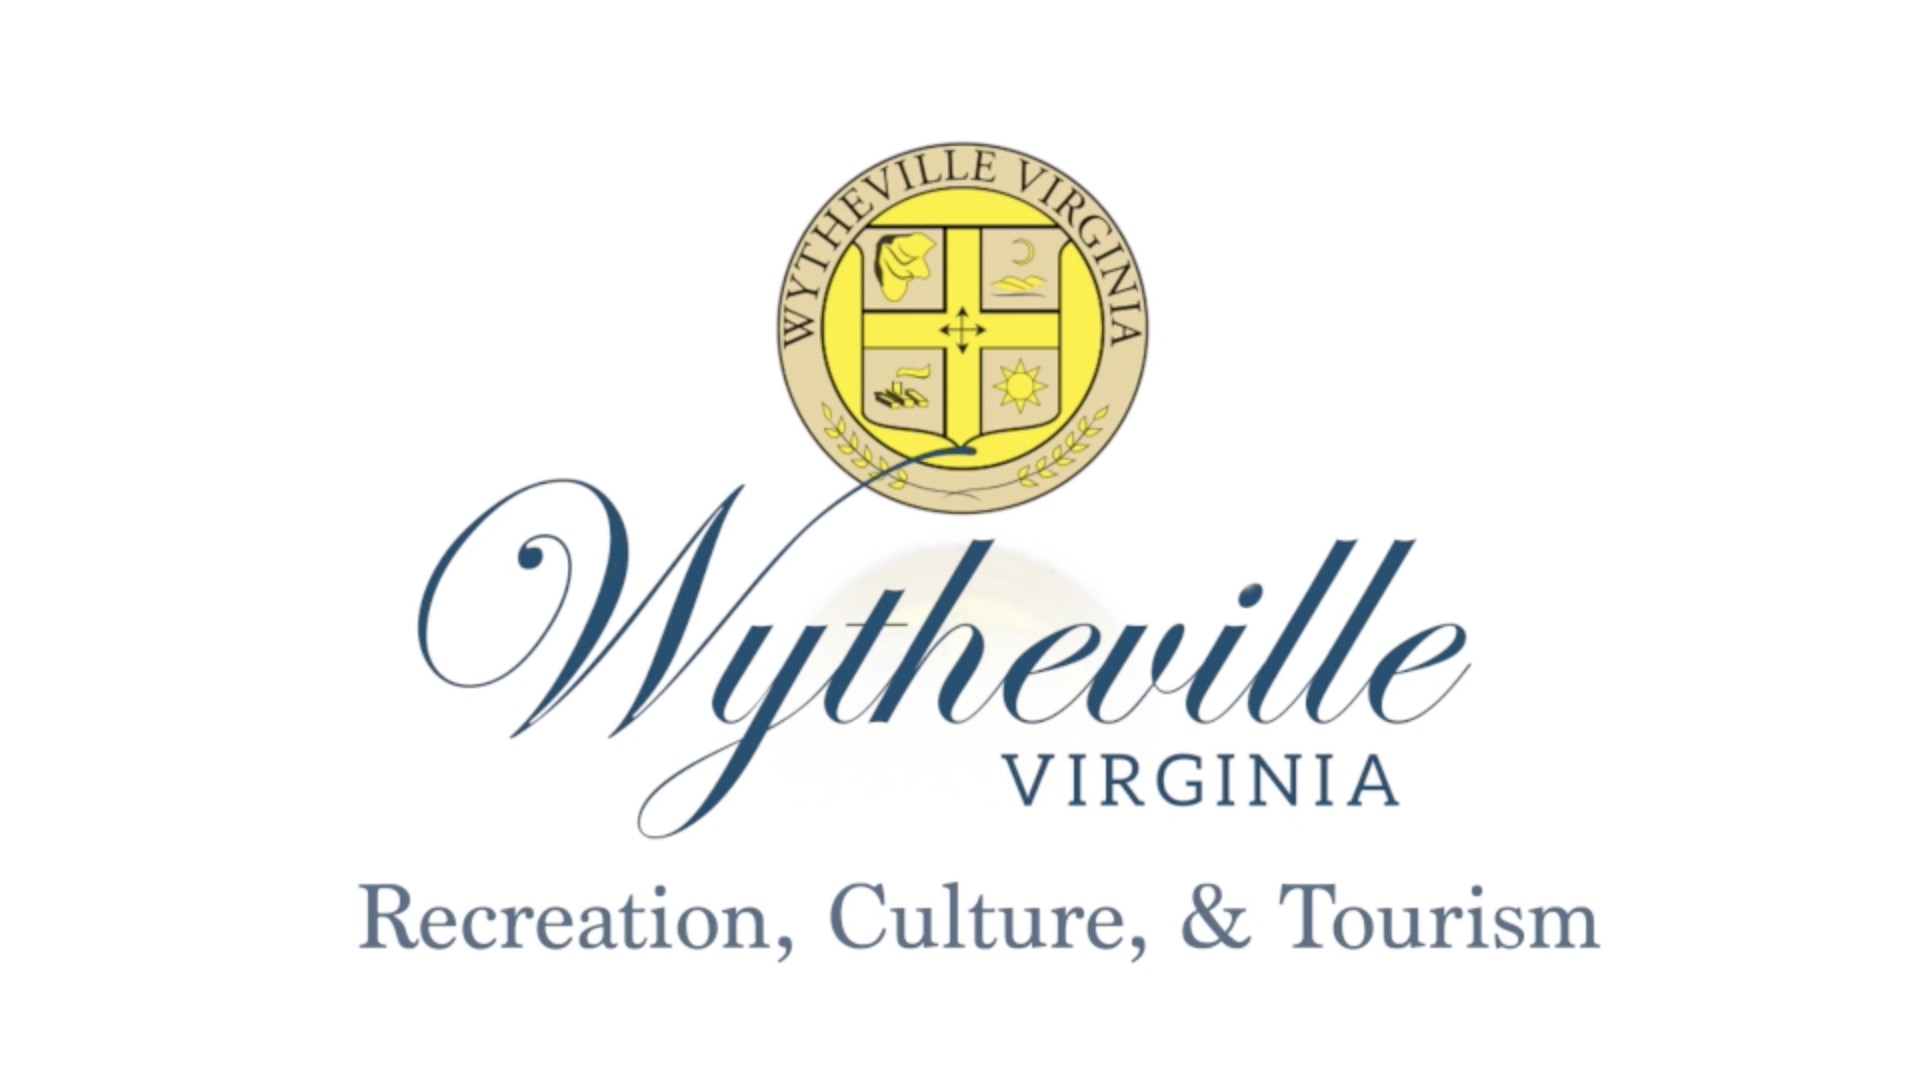 Wytheville-Wythe-Bland Chamber of Commerce